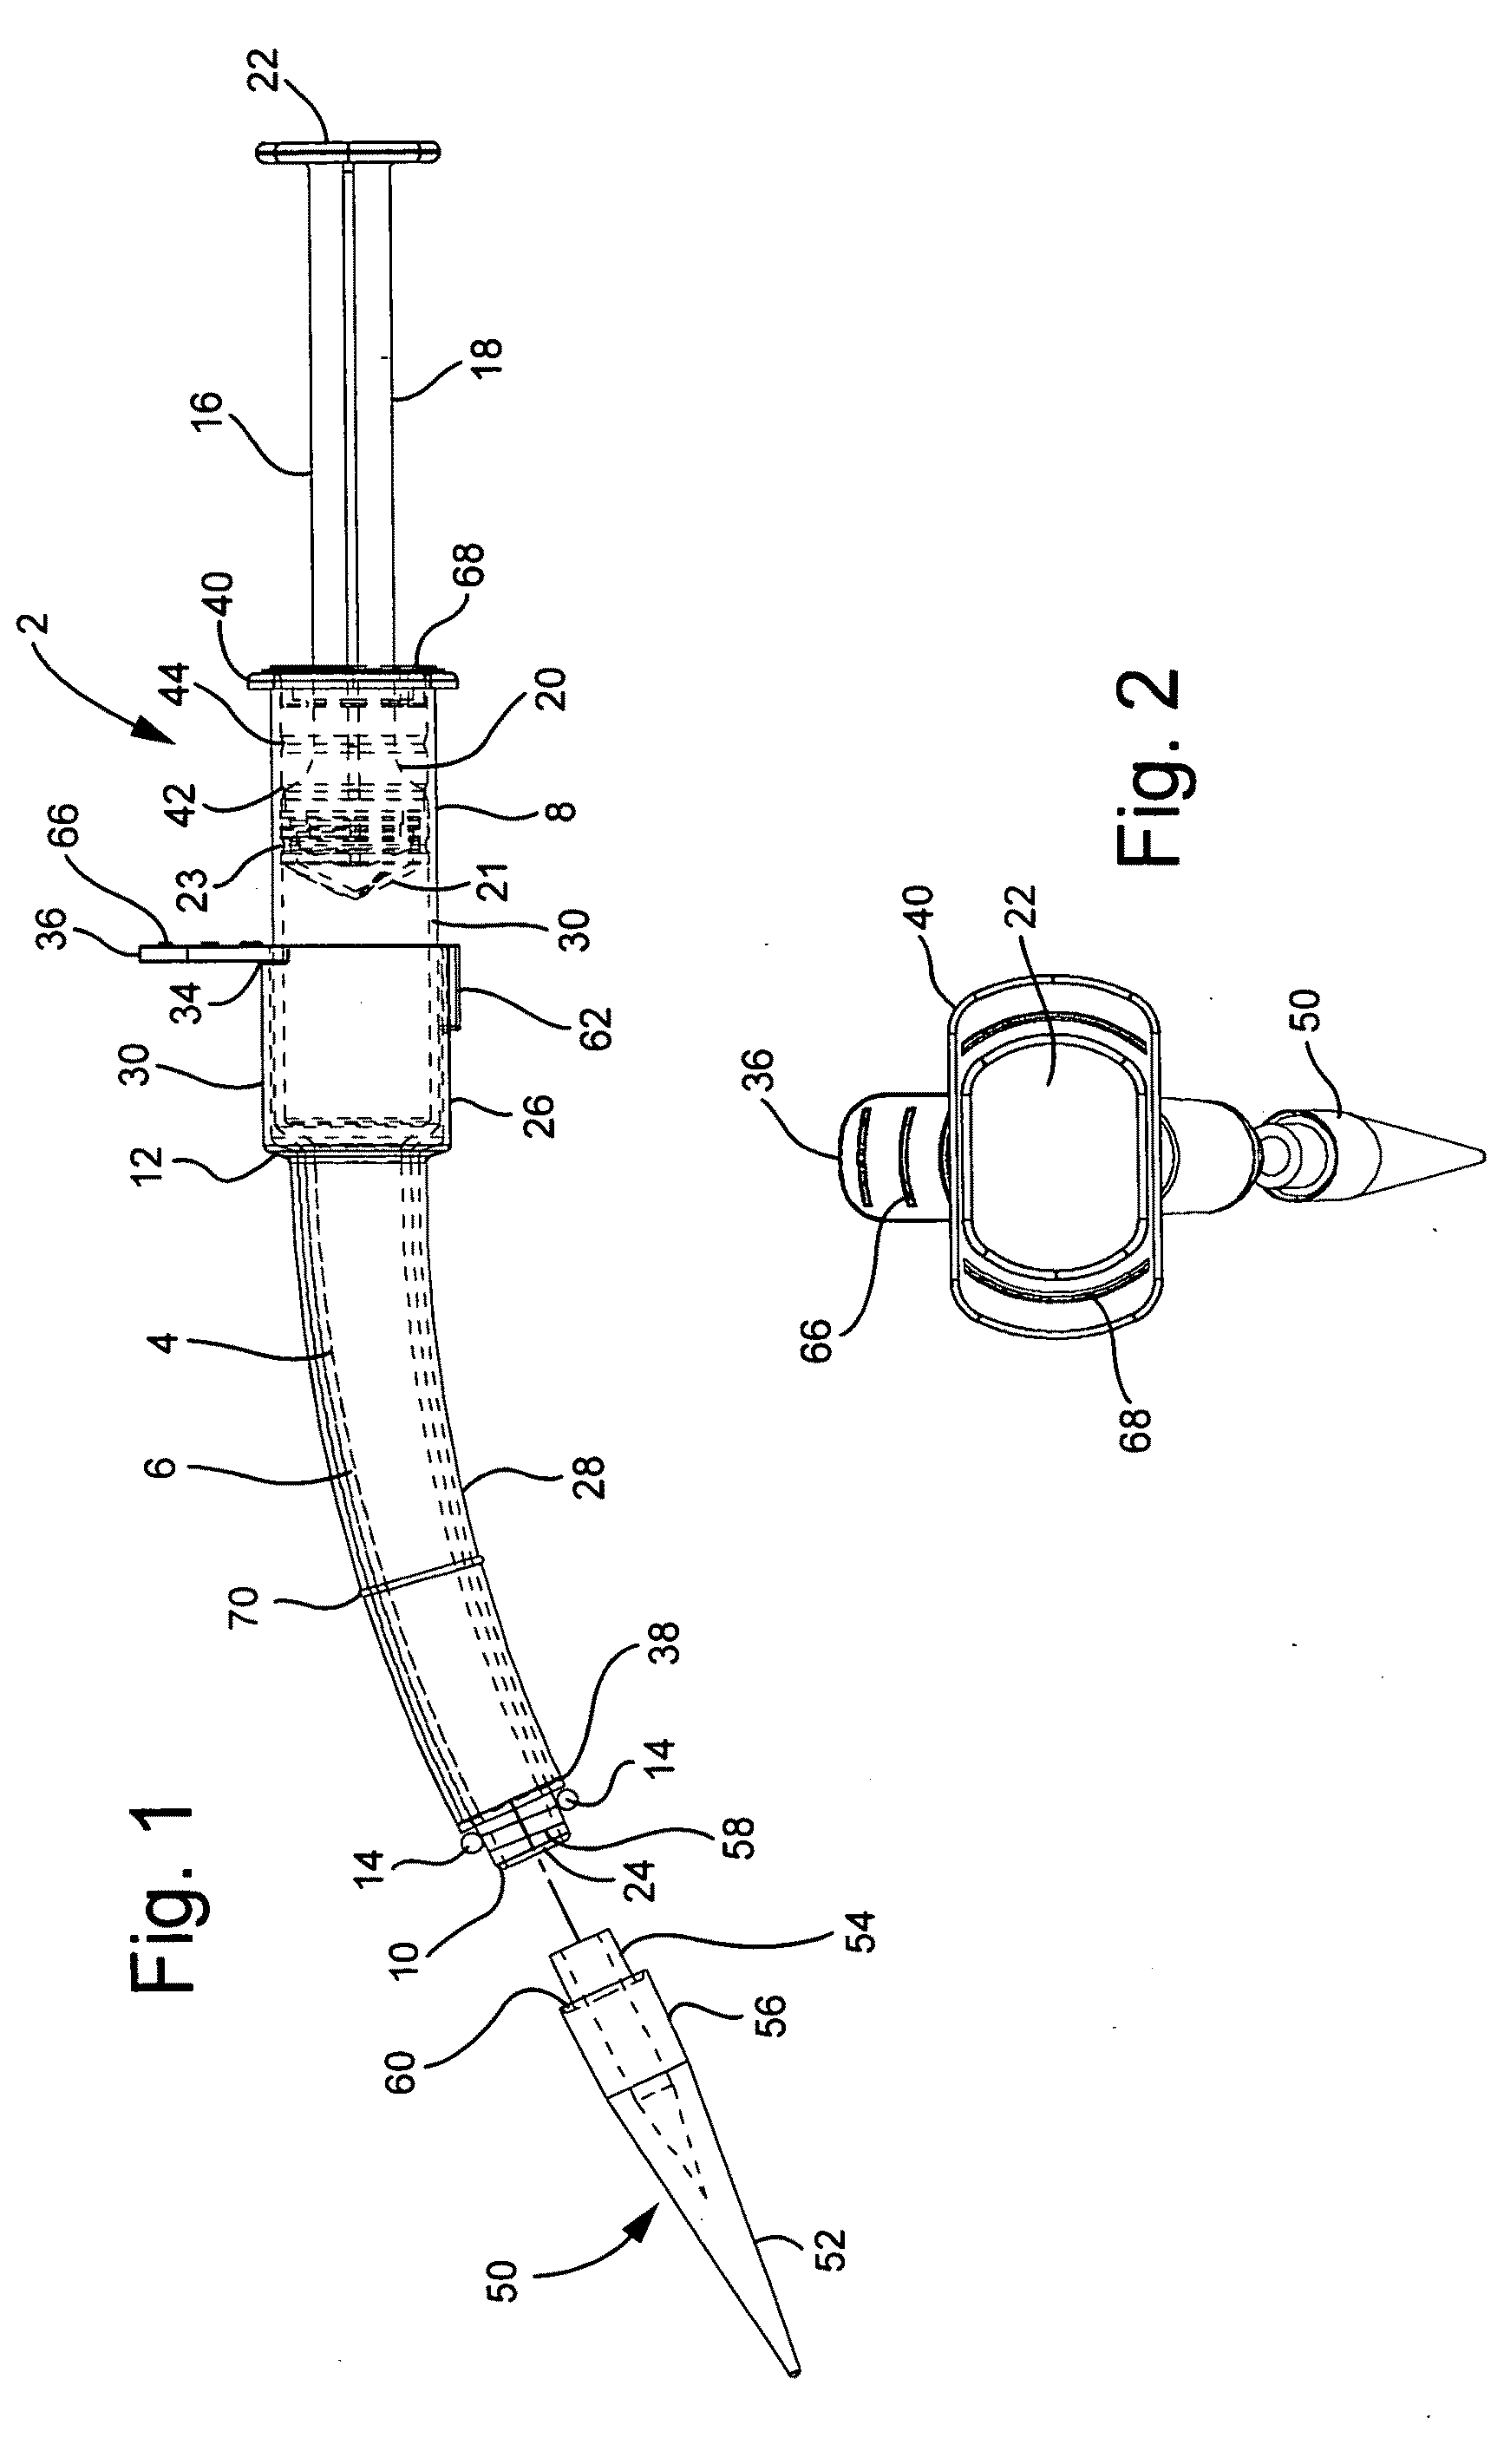 Elastic band ligation device and method for treatment of hemorrhoids